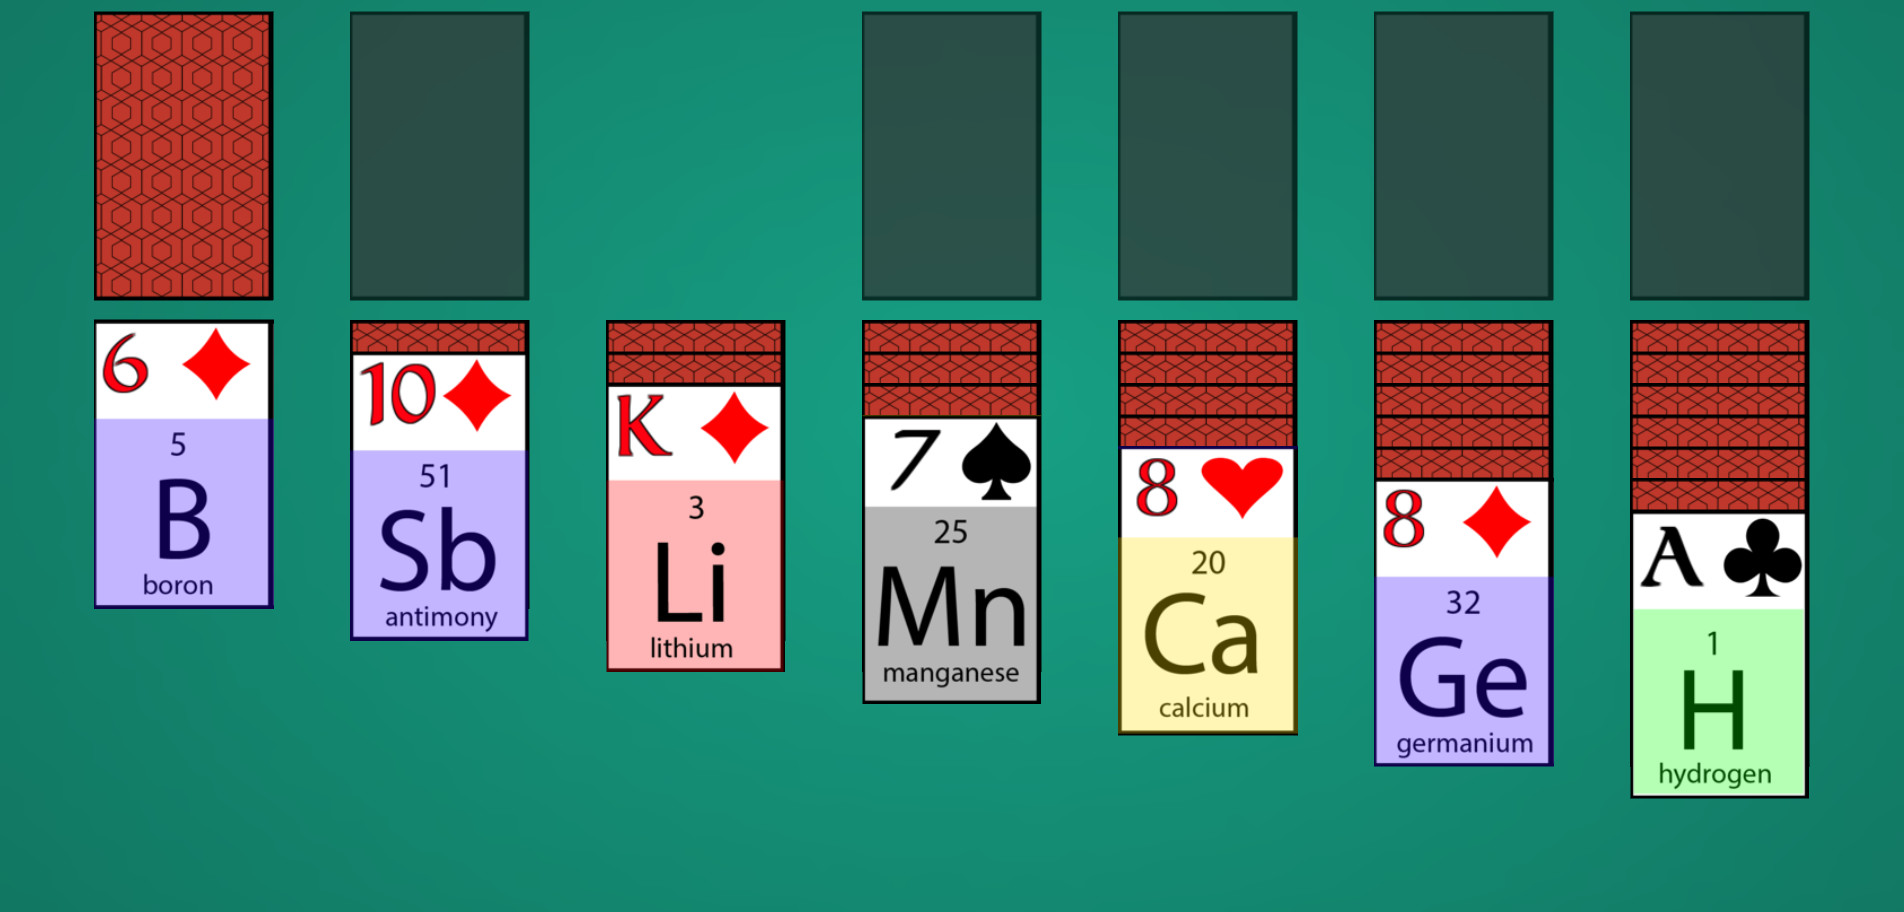 Solitaire: Learn Chemistry screenshot